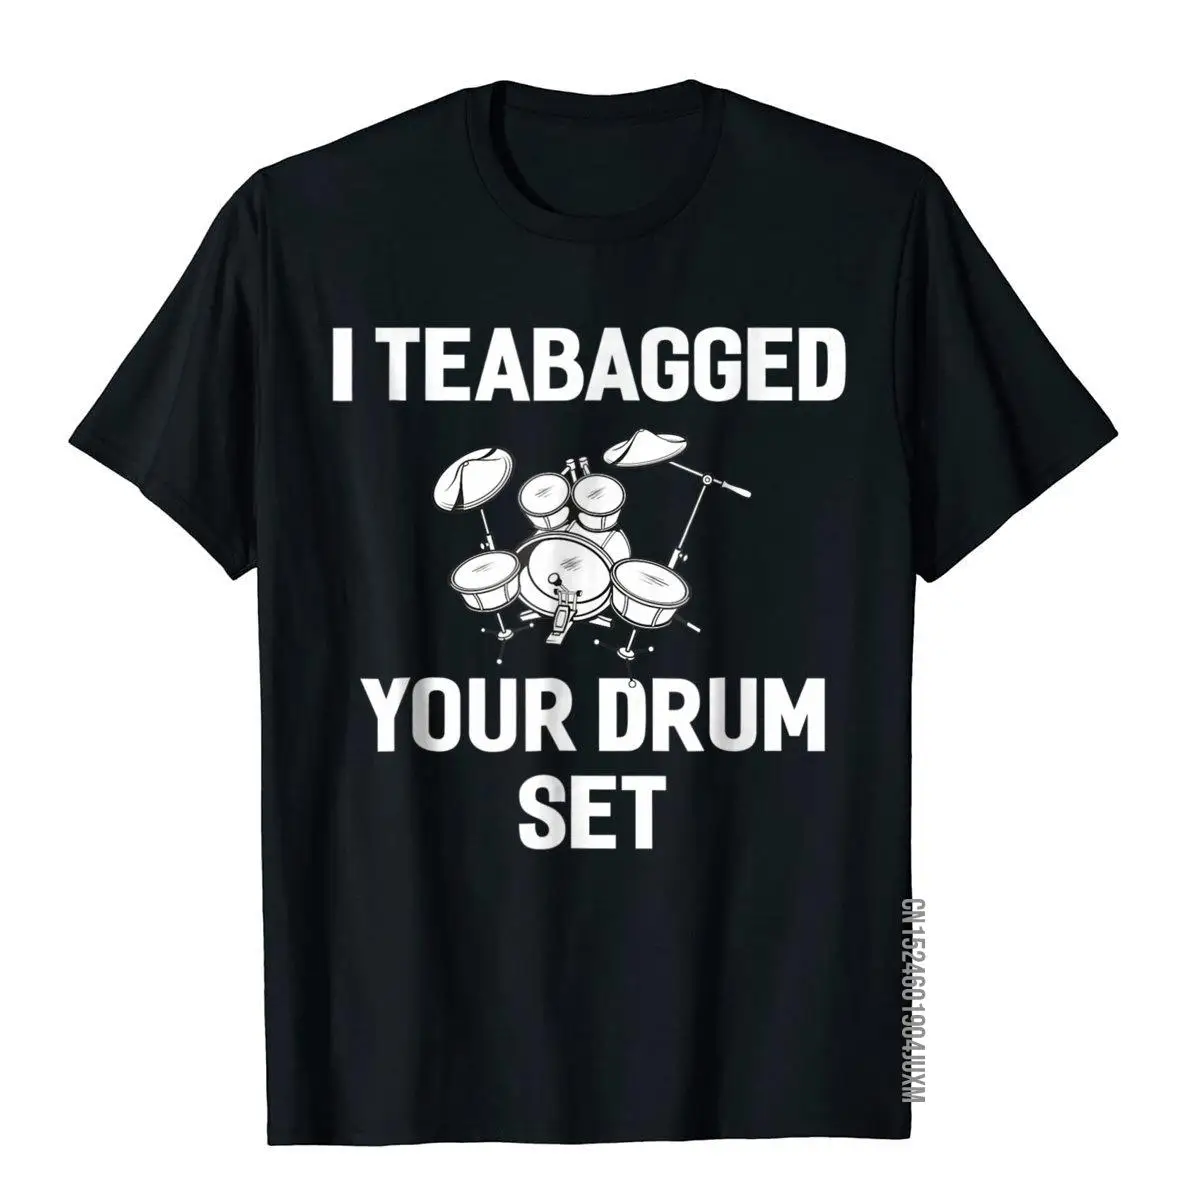 I Teabagged Your Drum Set T-Shirt Funny Sayings Sarcastic__97A2058black